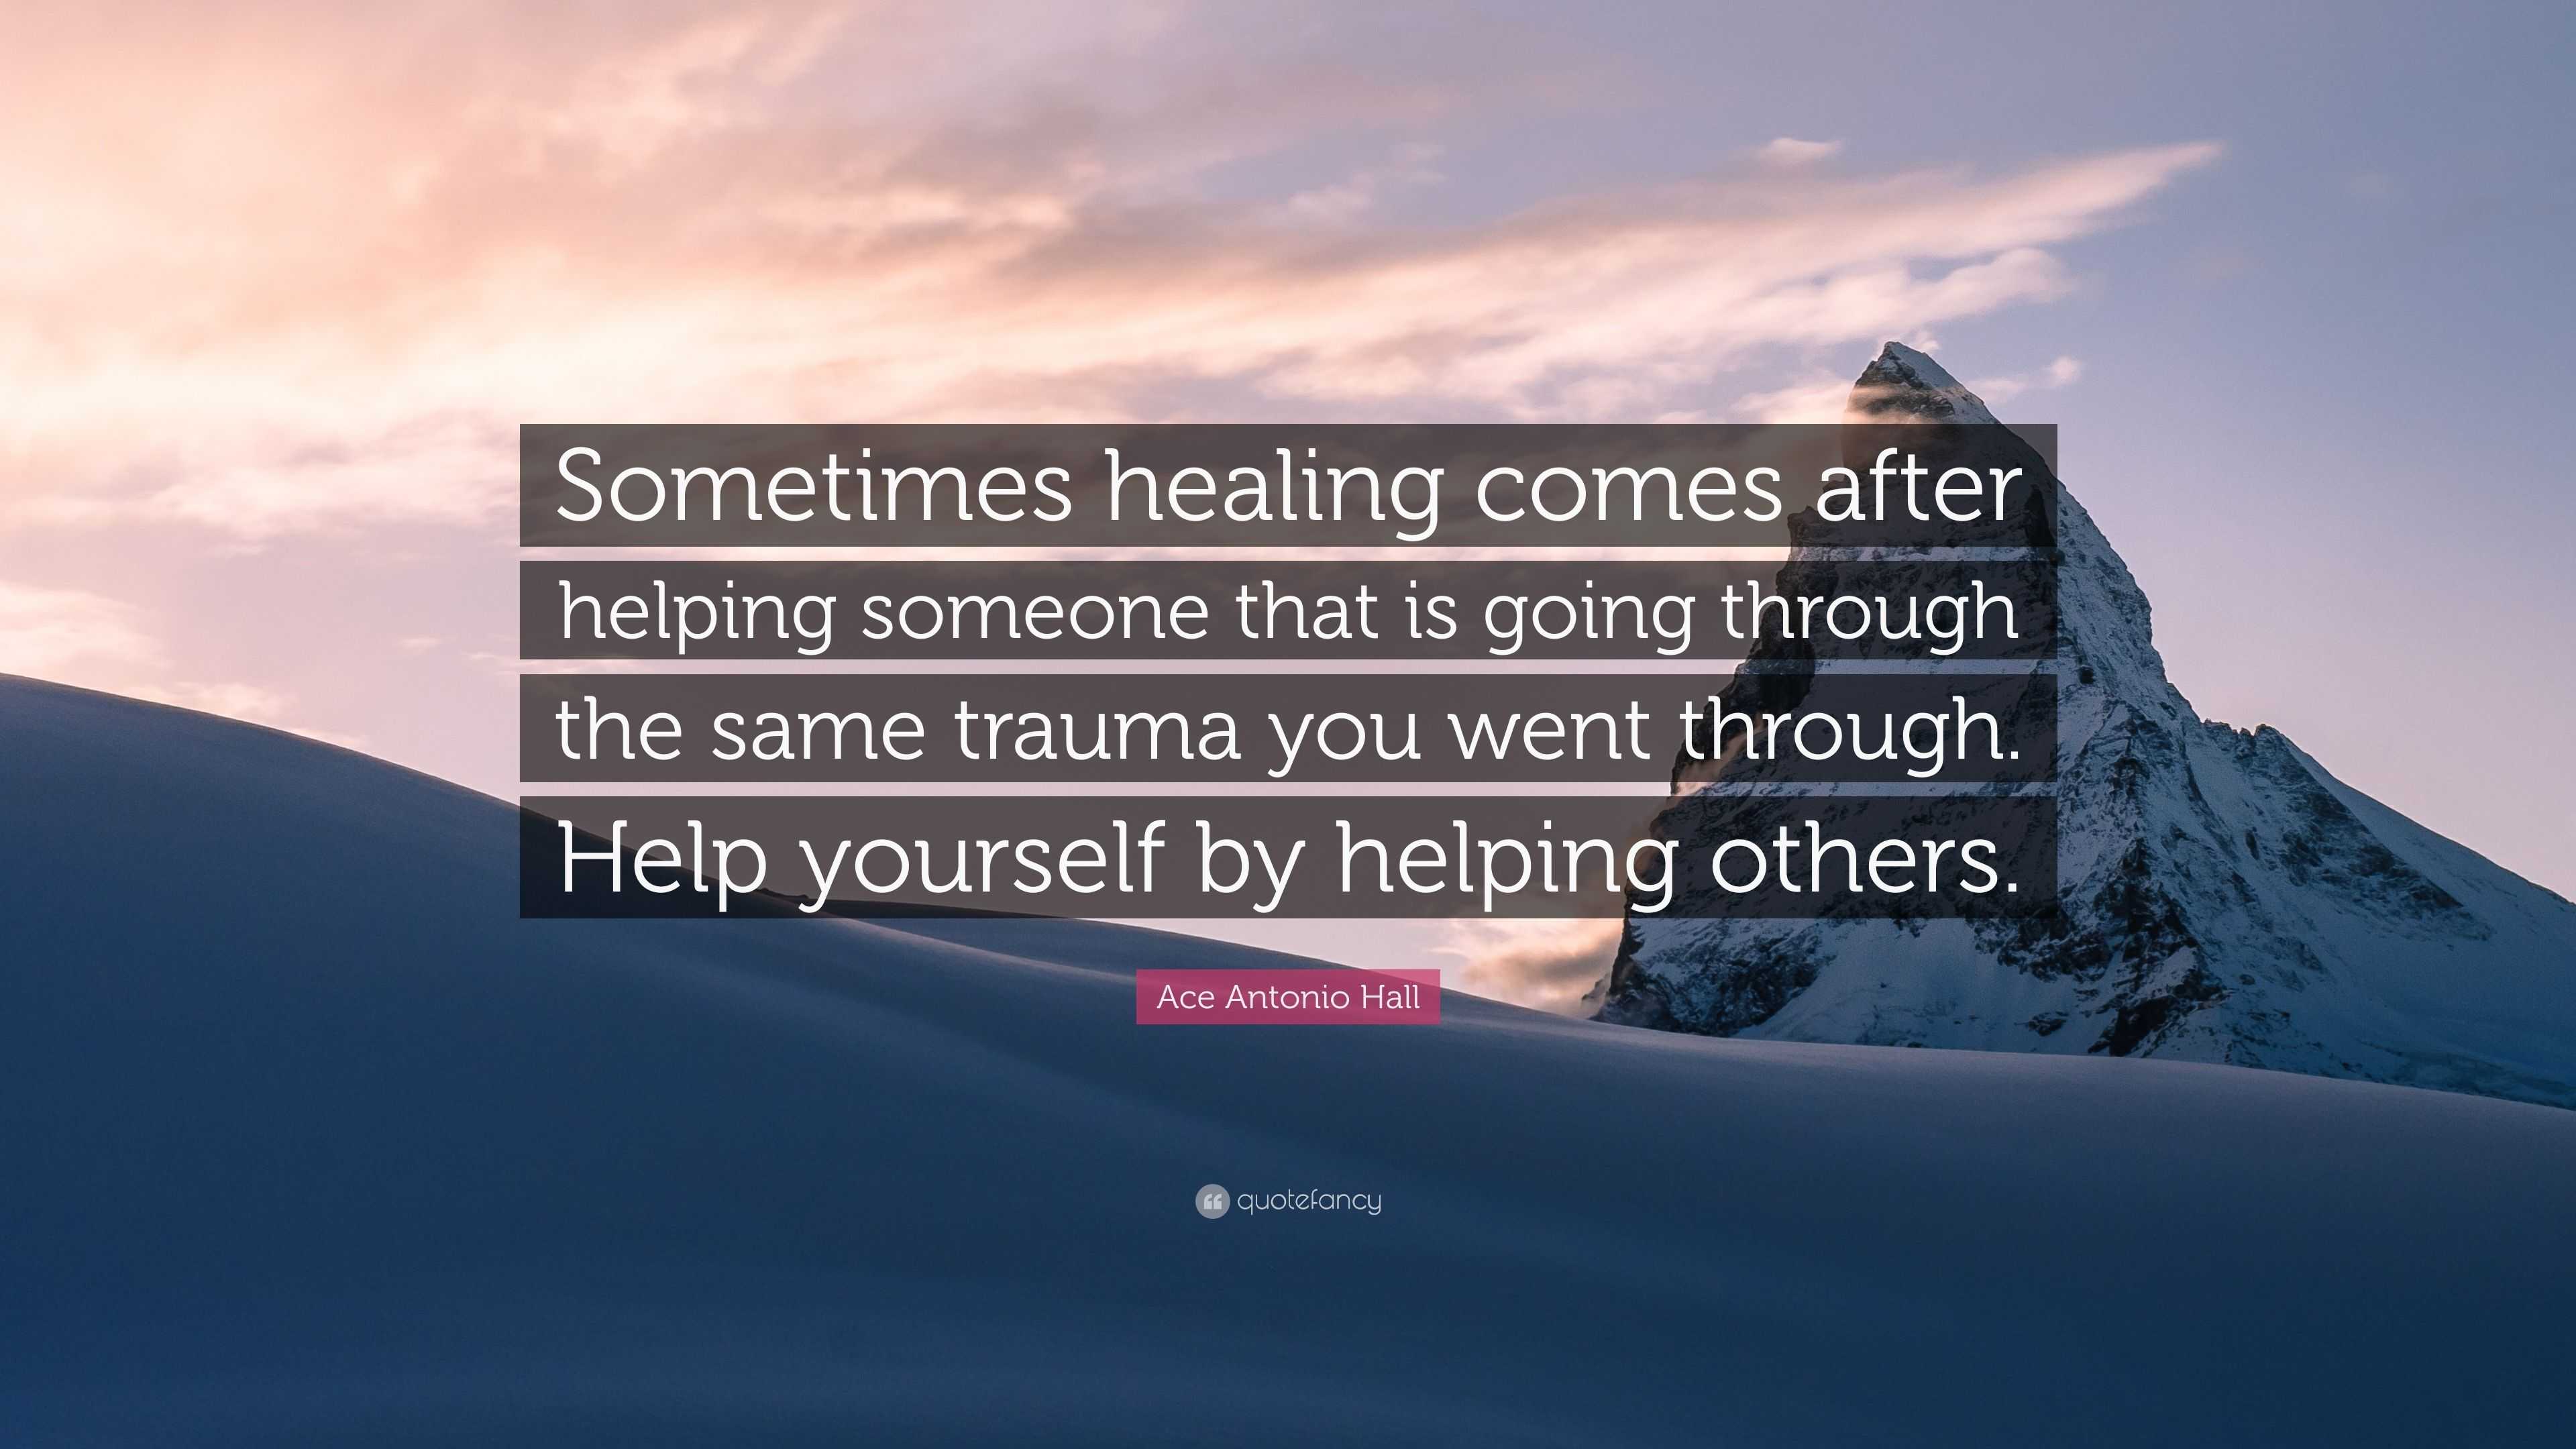 Ace Antonio Hall Quote: “Sometimes healing comes after helping someone